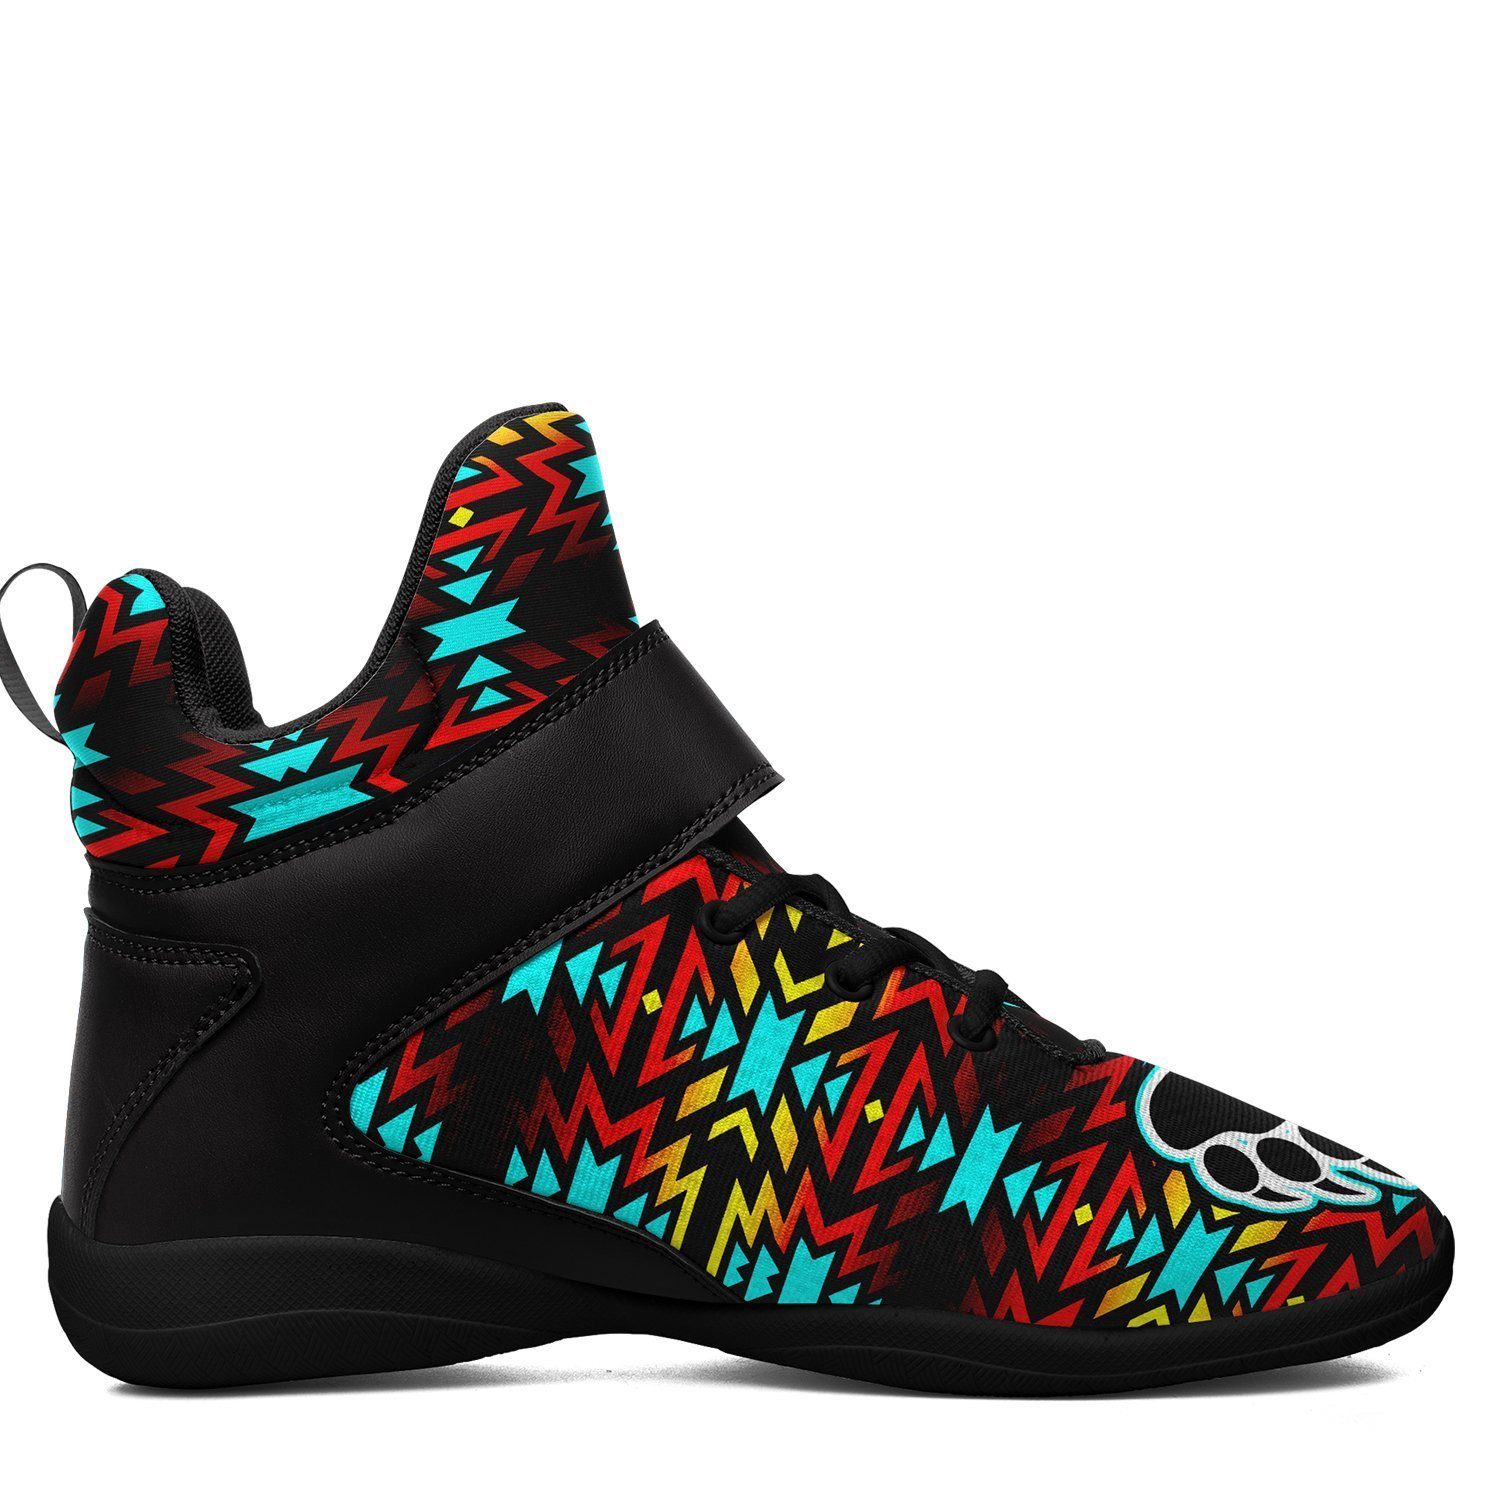 Fire Colors and Turquoise Bearpaw Ipottaa Basketball / Sport High Top Shoes - Black Sole 49 Dzine 